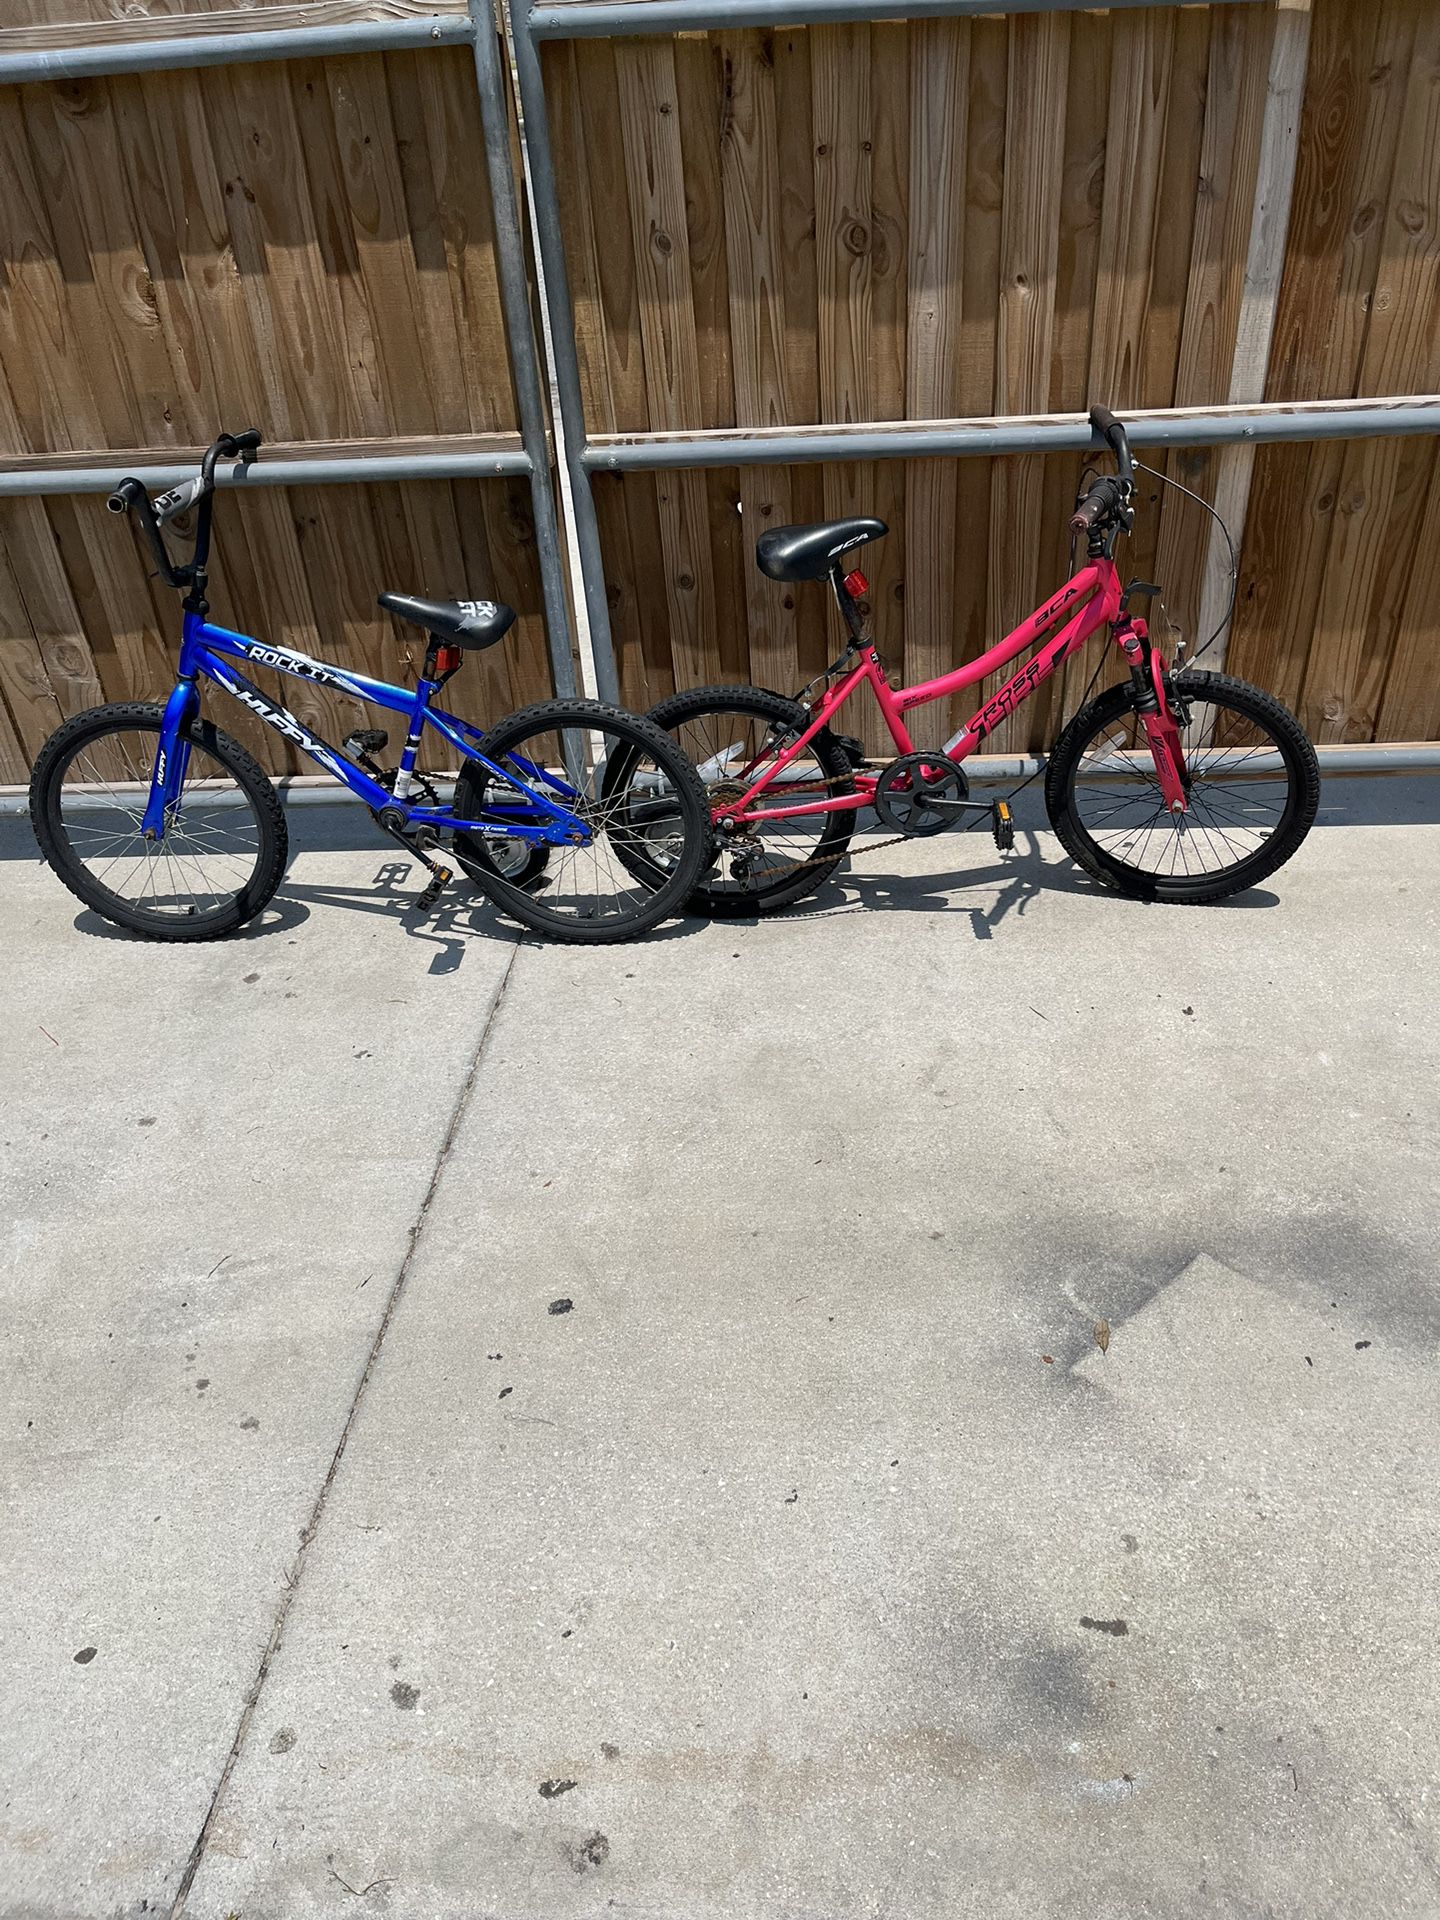 2 Bikes (Come Together)